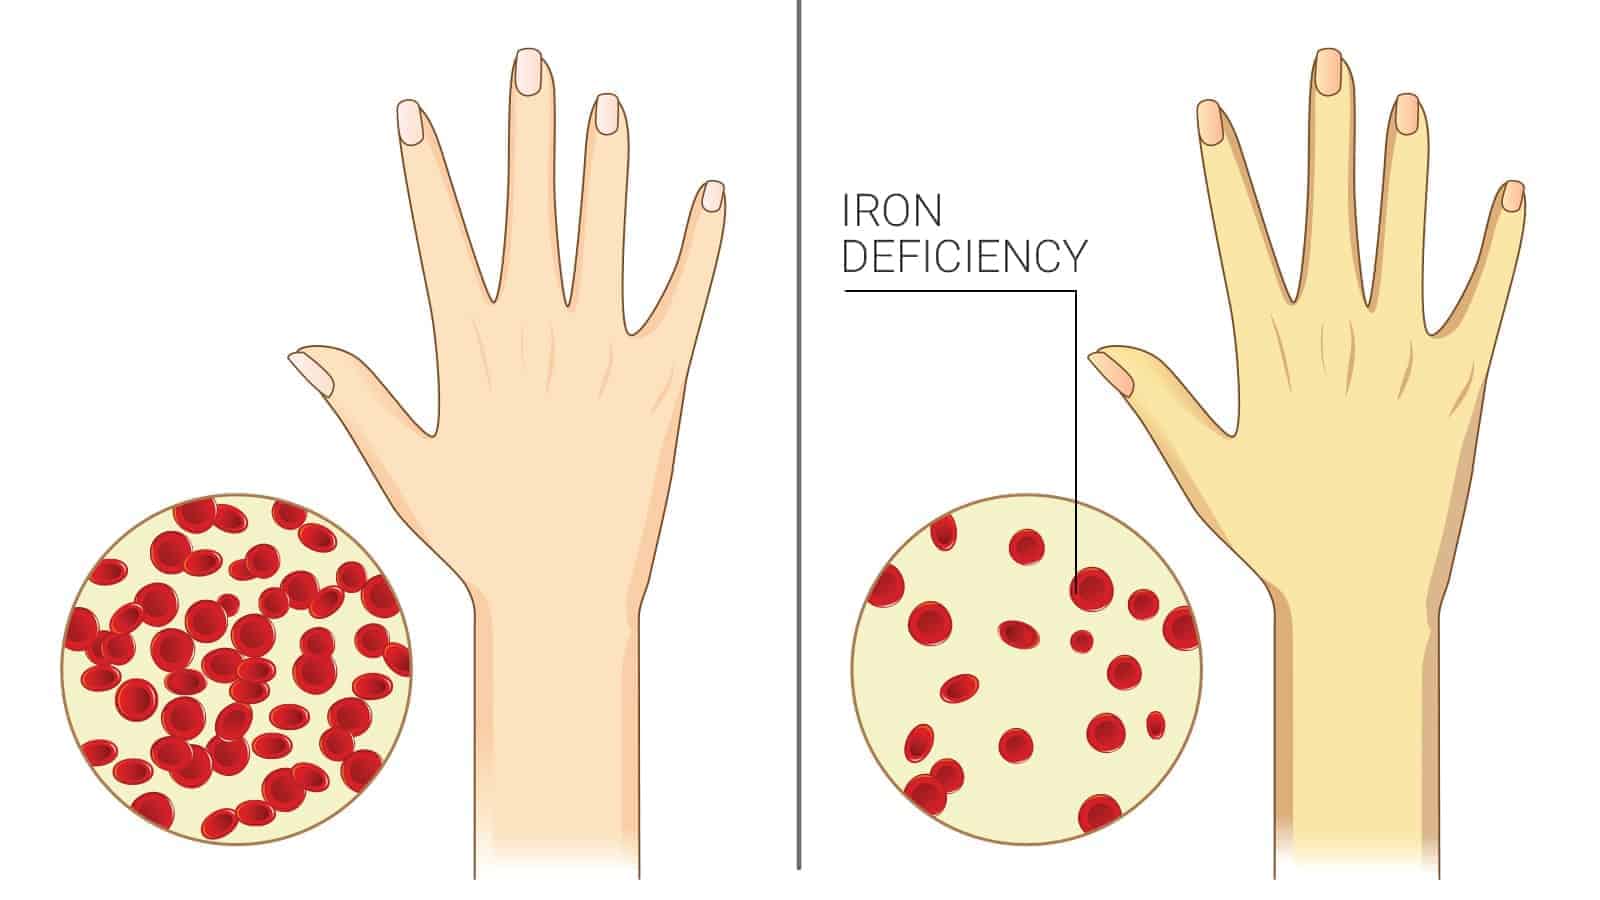 7 Signs of Chronic Iron Deficiency Most Women Ignore